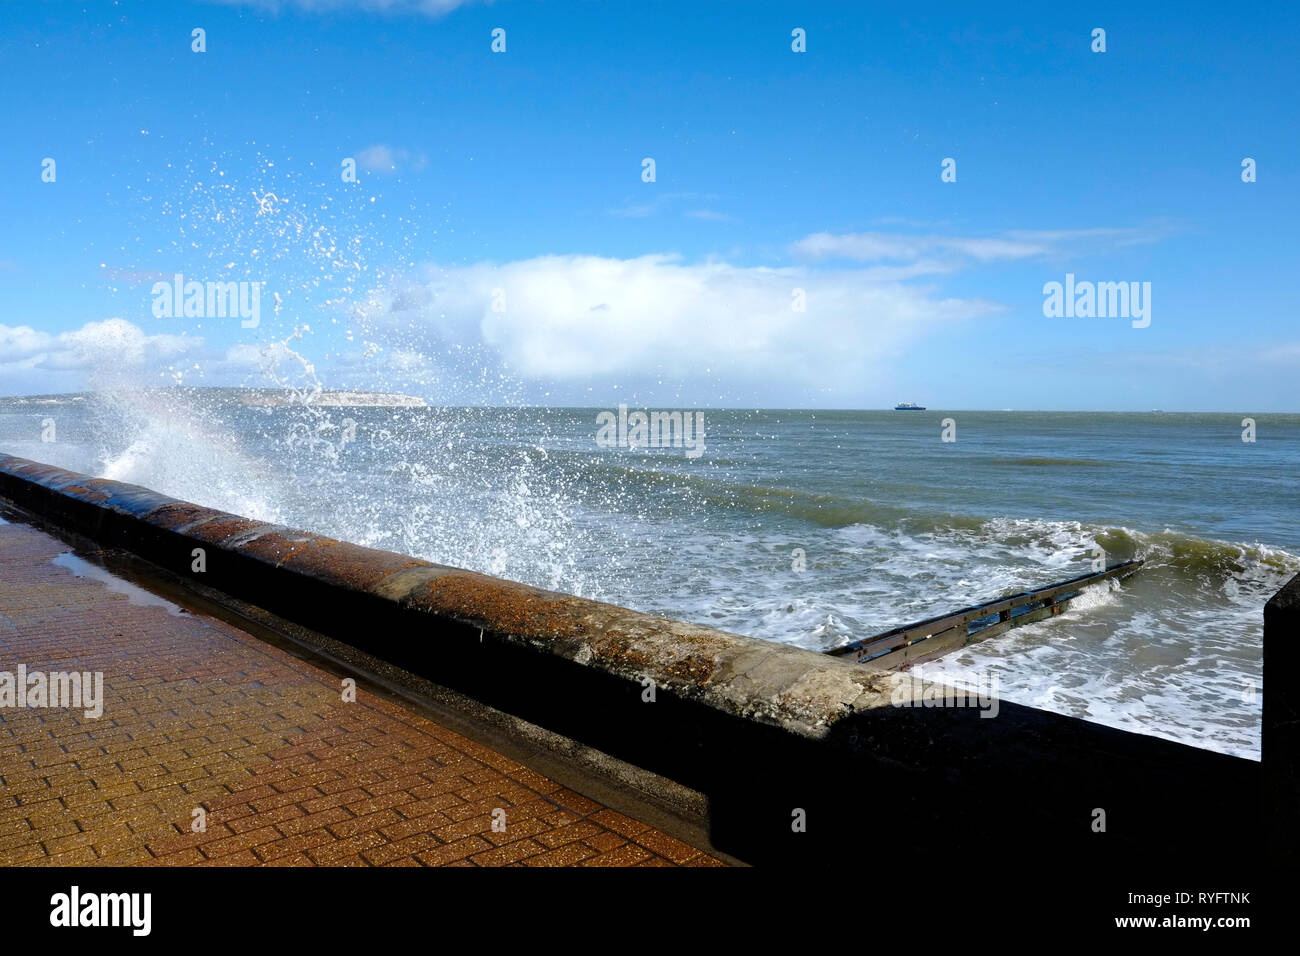 Waves crash against the seafront revetment wall on Shanklin Esplanade seafront, Isle of Wight, UK. Stock Photo